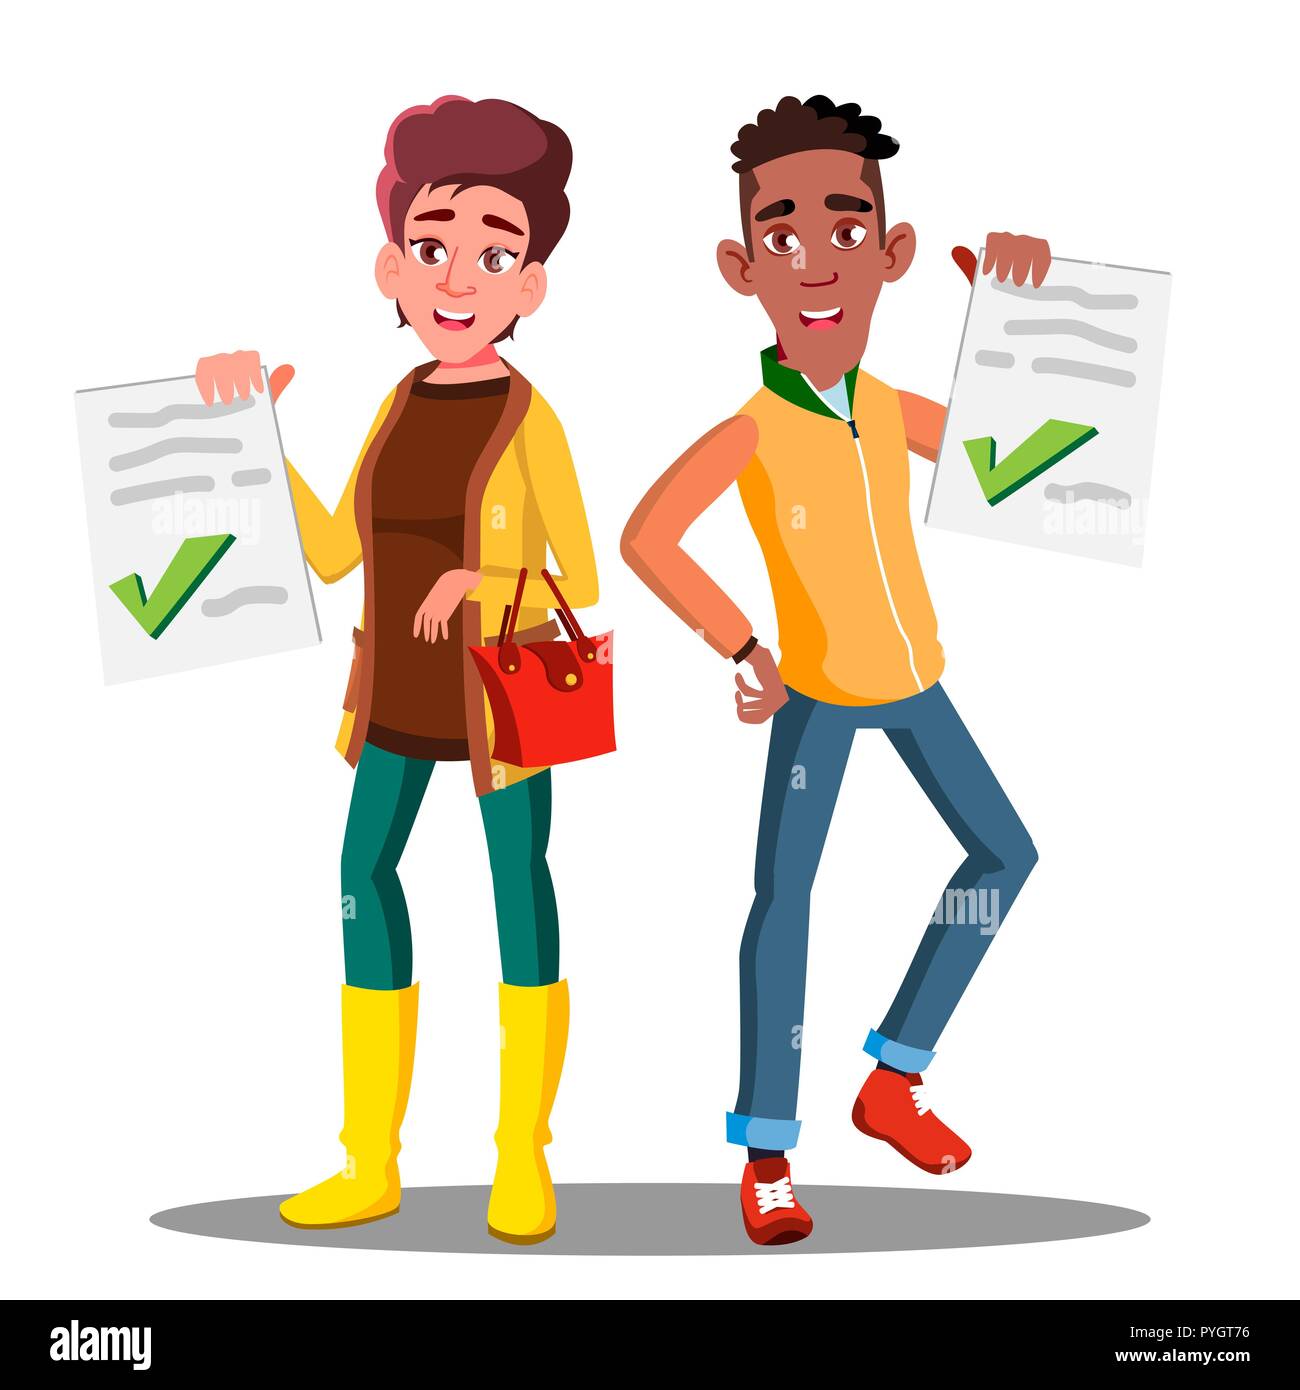 Happy Student Holding Paper With Excellent Test Exam Result Vector. Isolated Illustration Stock Vector